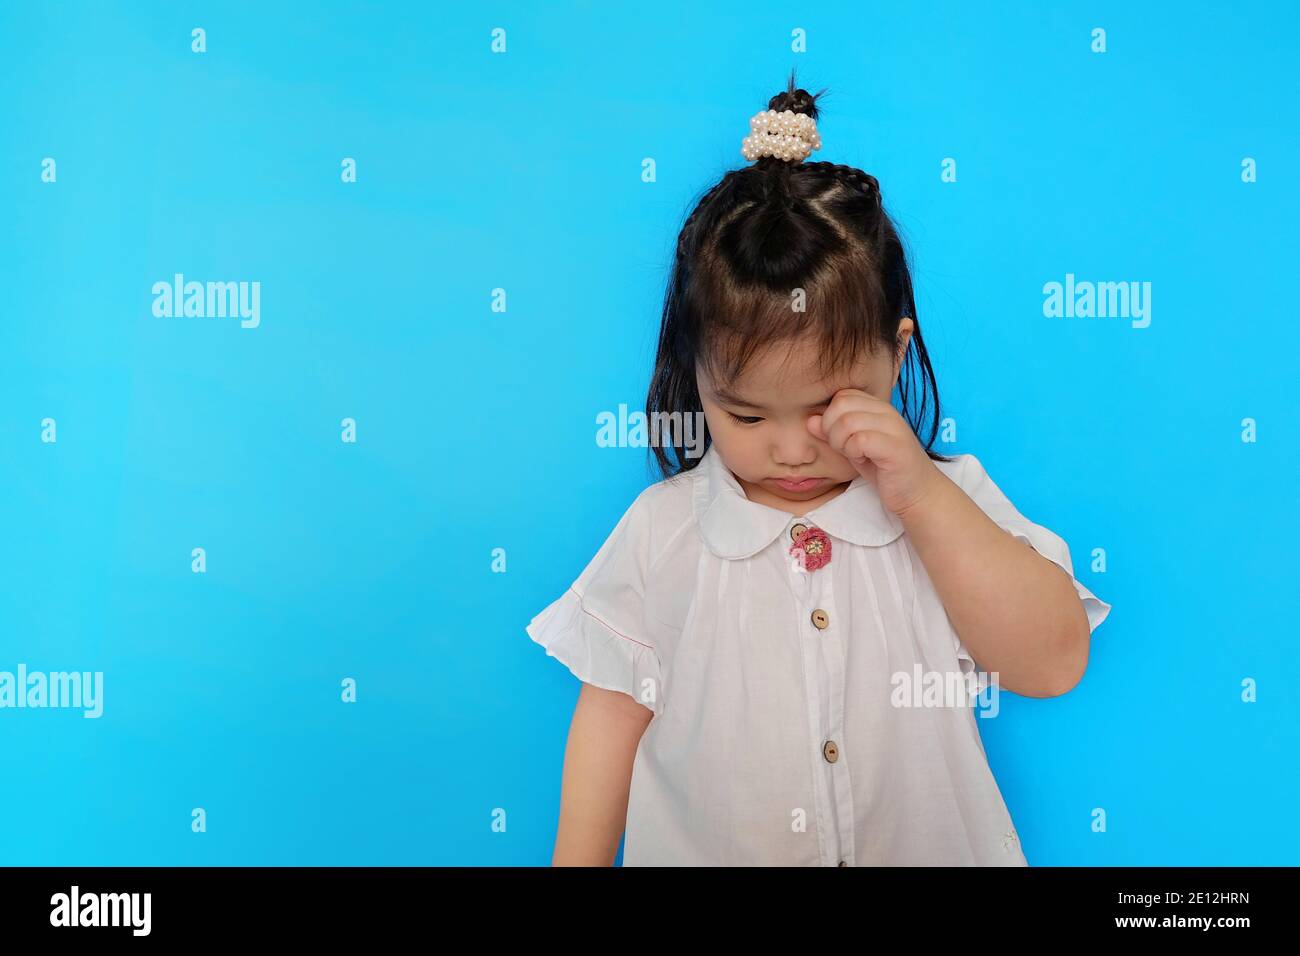 A cute Asian female toddler feeling upset, crying and wiping tears from her eye with her hand. Plain blue background. Stock Photo